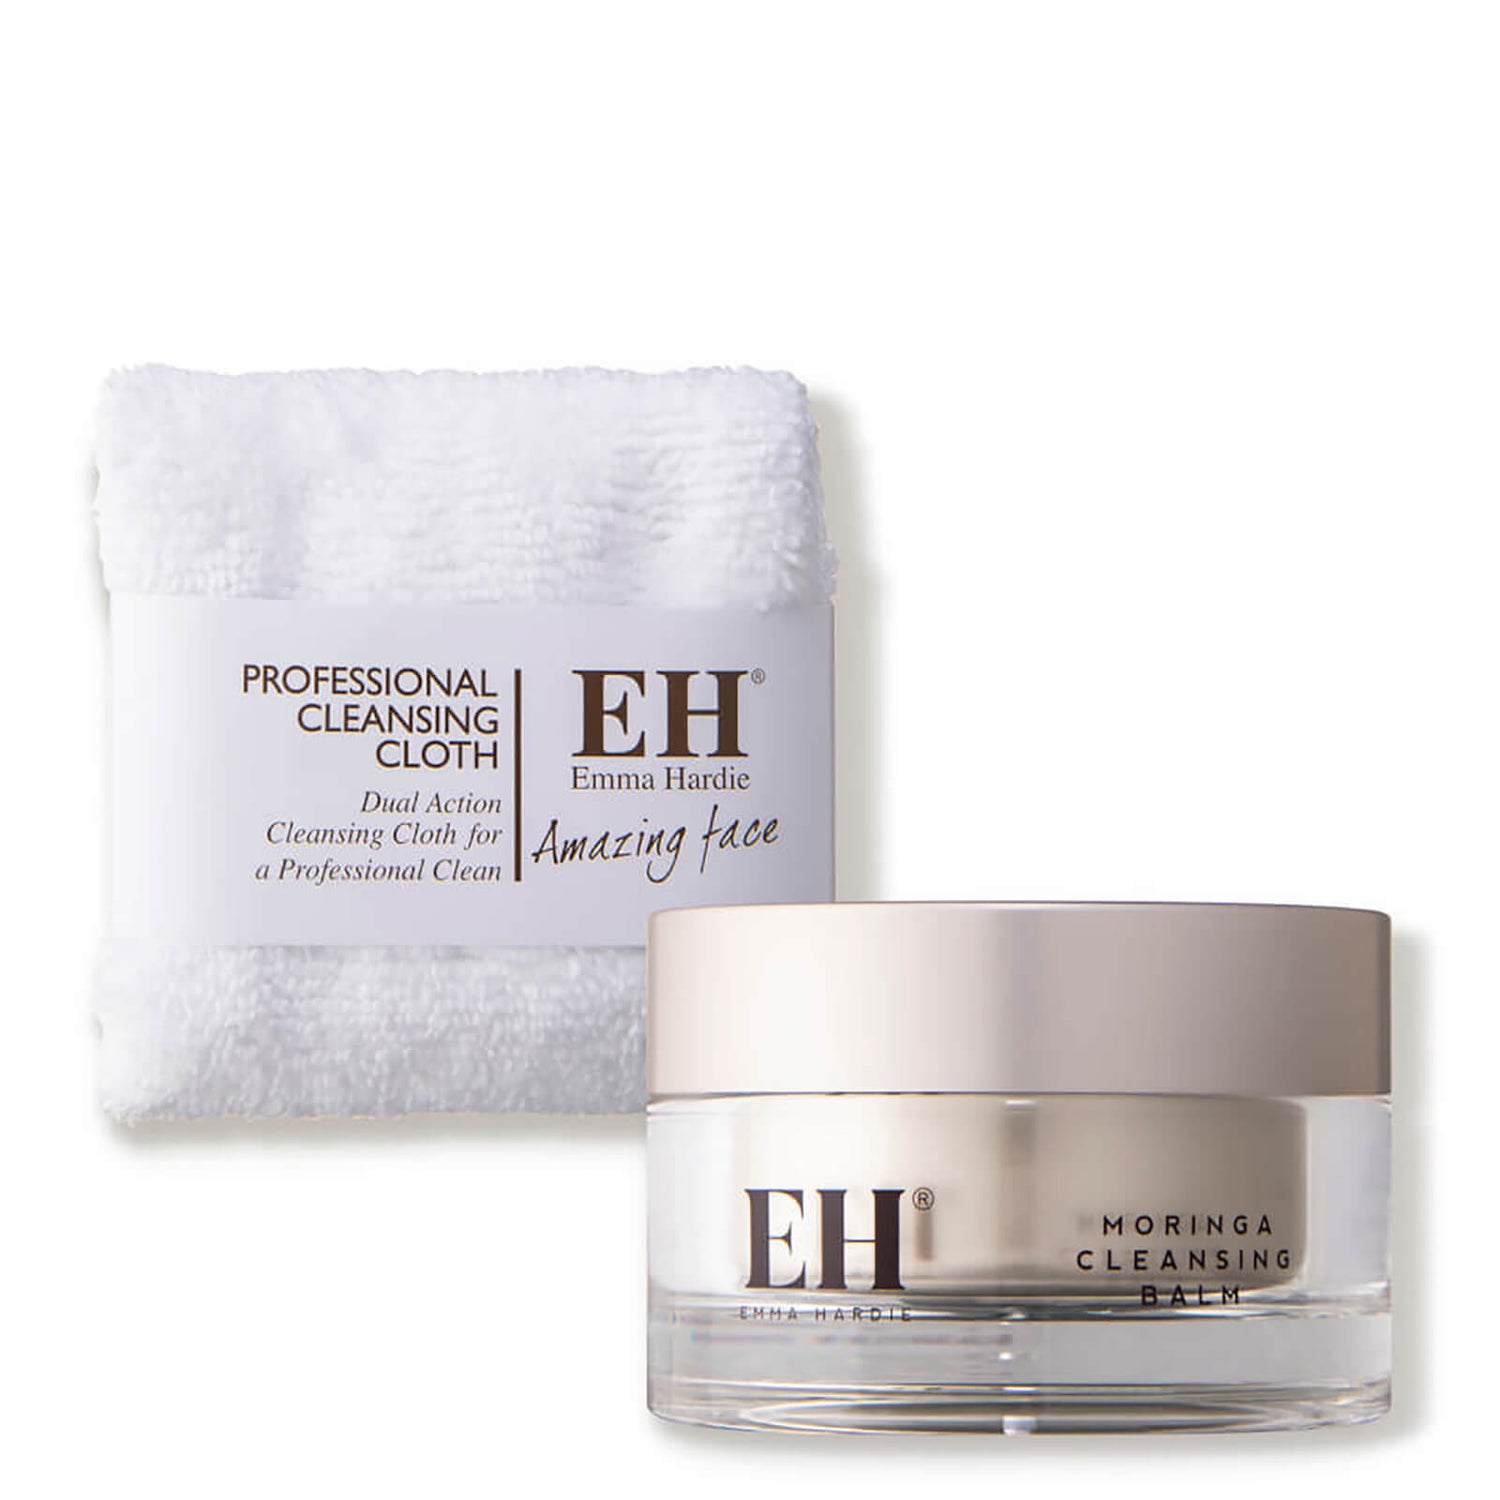 Emma Hardie Moringa Cleansing Balm with Professional Cleansing Cloth 100 ml